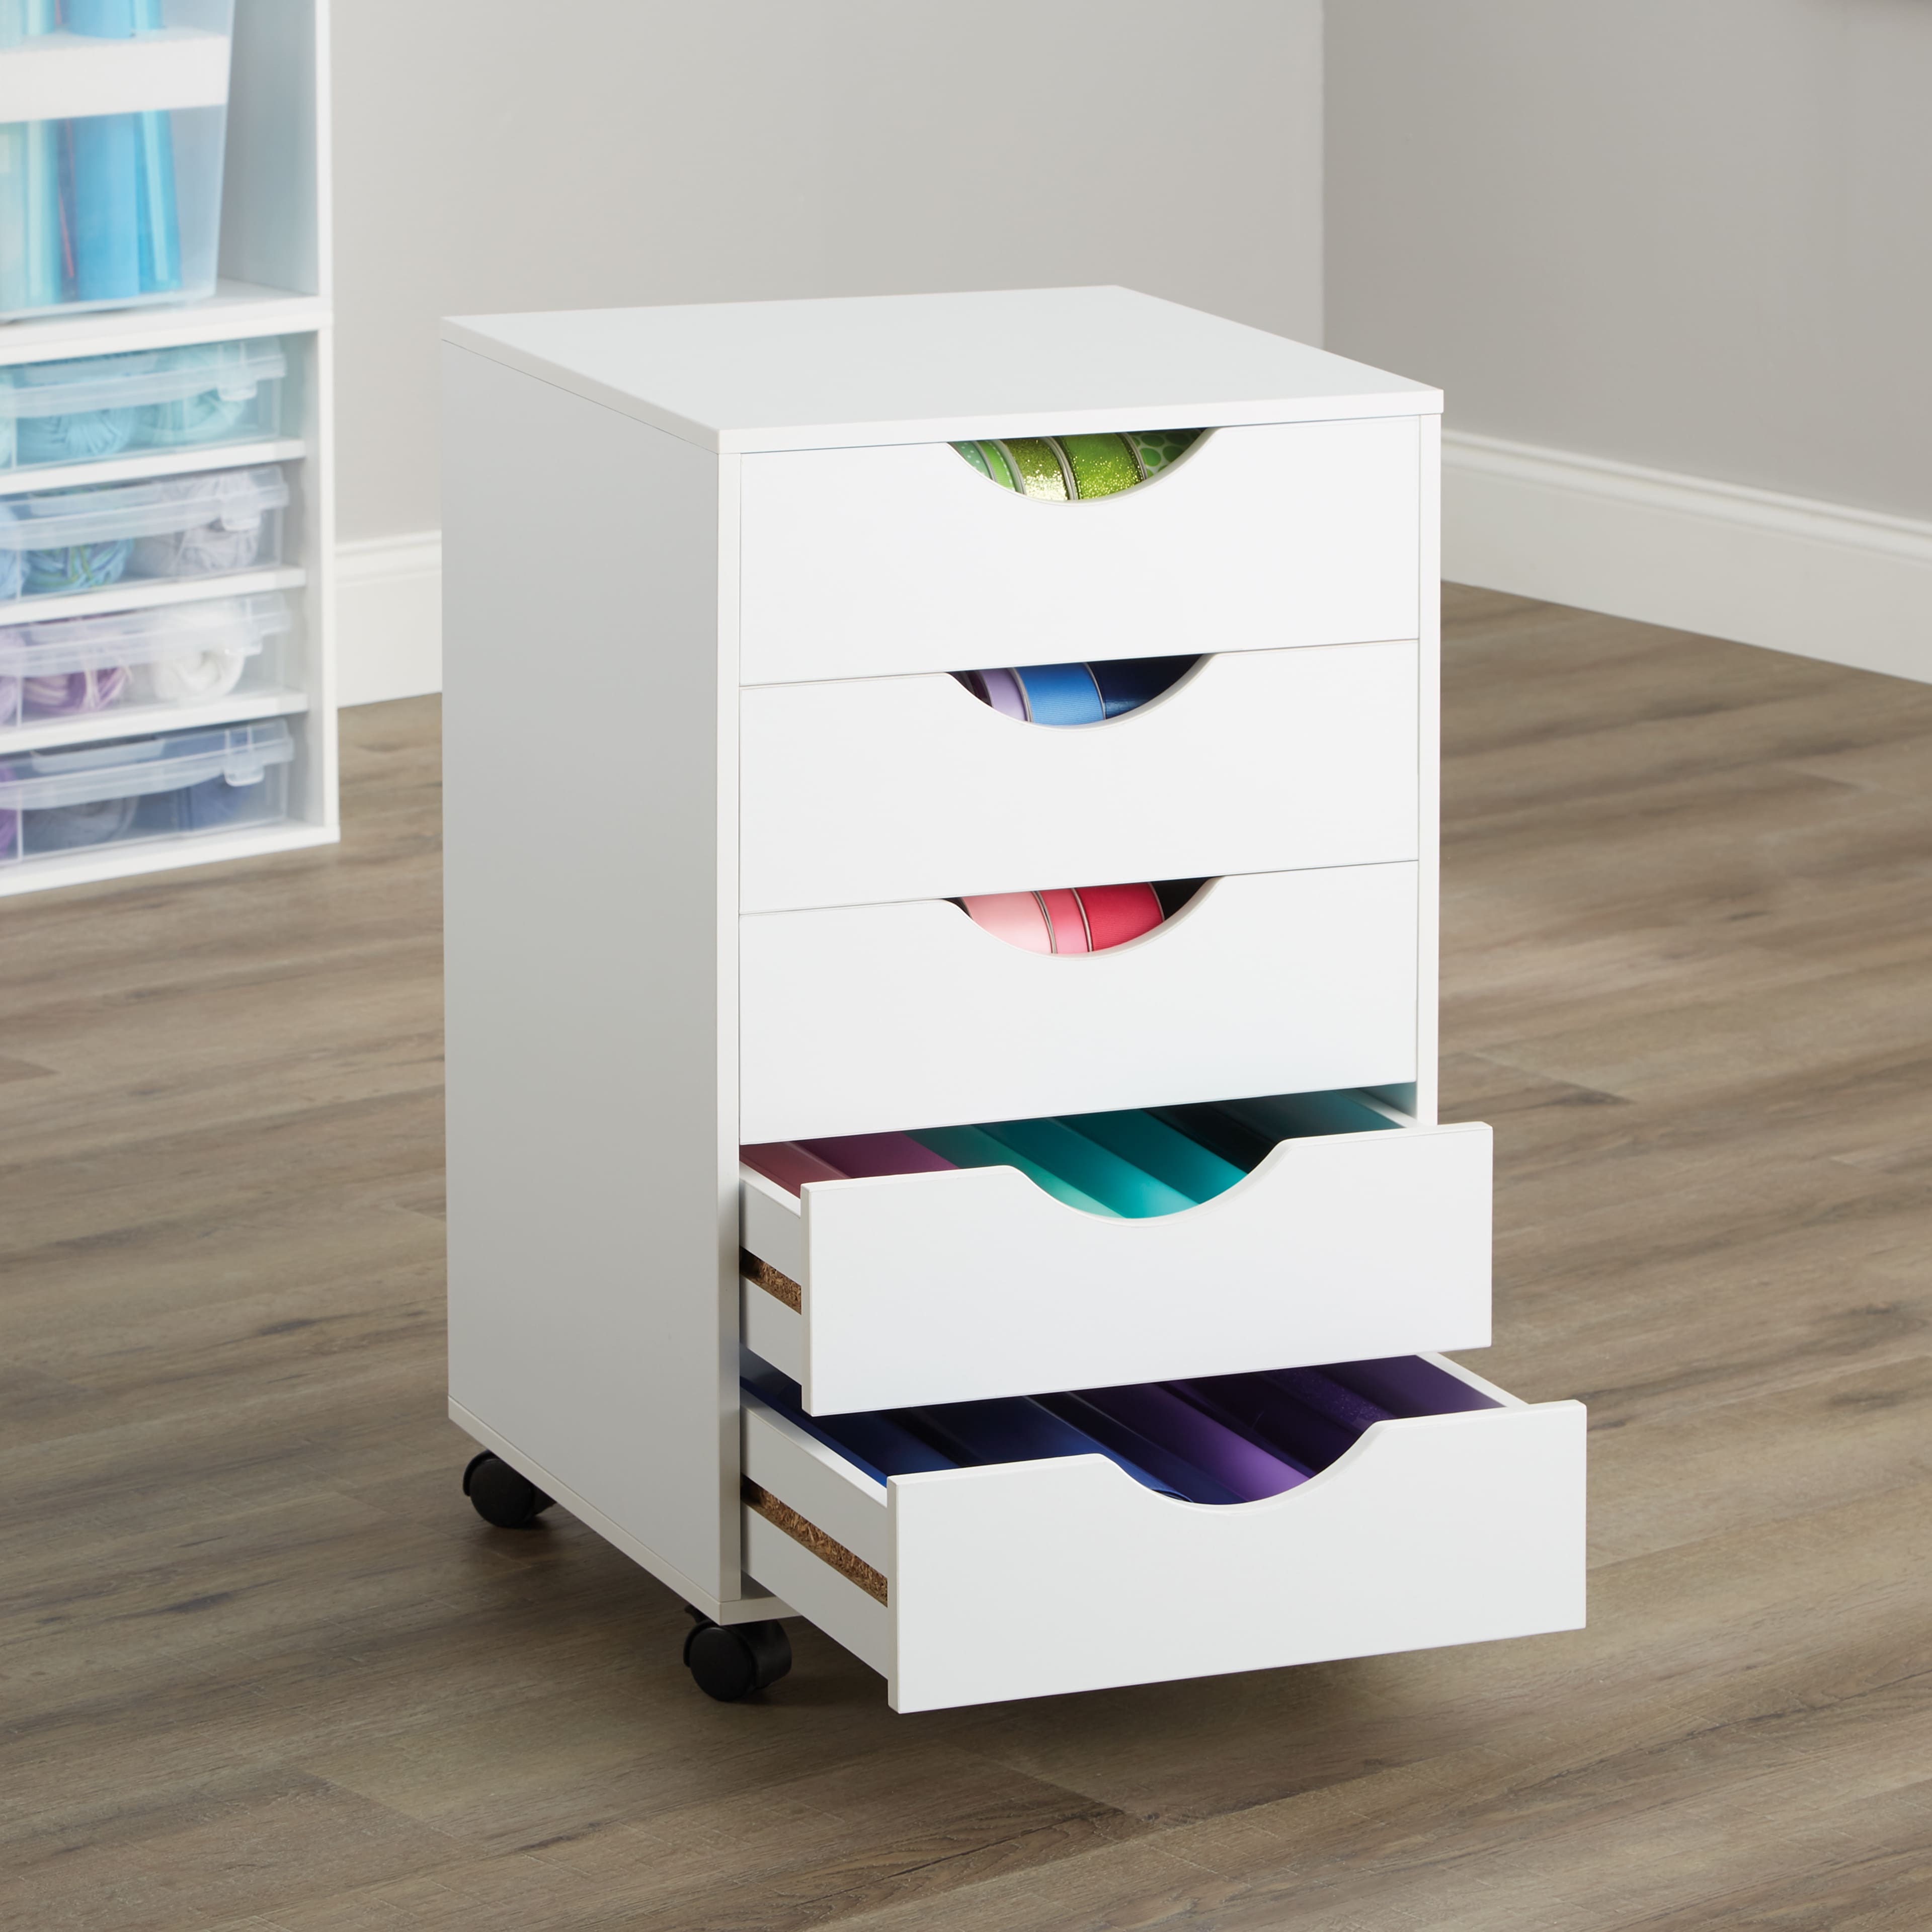 Simply Tidy Modular Mobile Chest, White